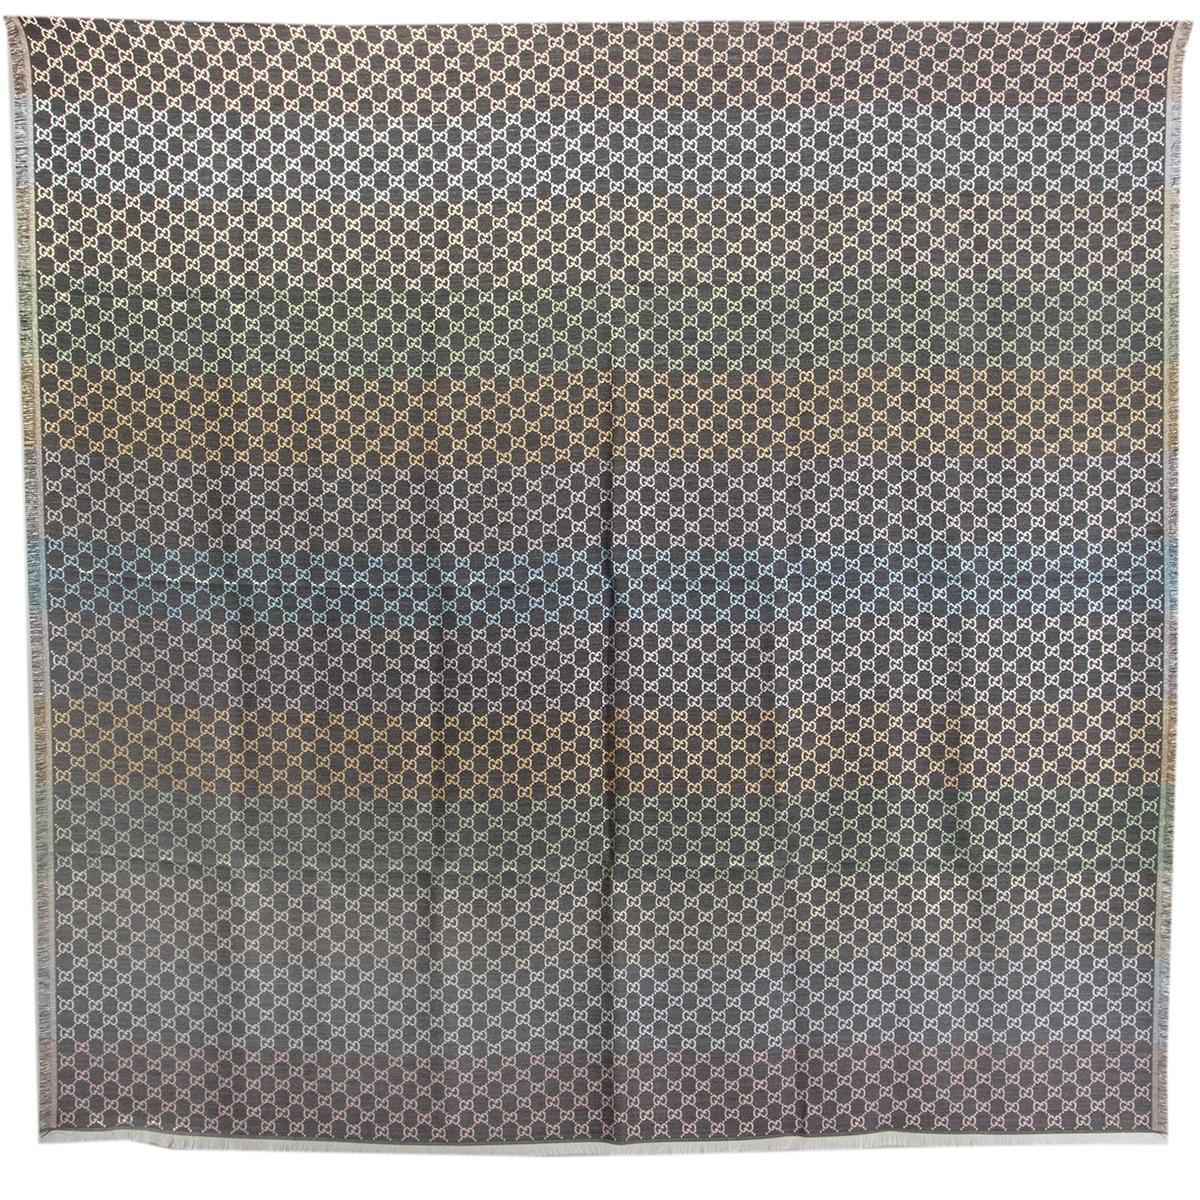 100% authentic Gucci GG Monogram shawl crafted using a jacquard technique and featuring the GG pattern in pastel rainbow grey, light blue, light pink, yellow, light green, champagne and silver 31% viscose 28% cotton 23% wool 10% silk 8% metallic